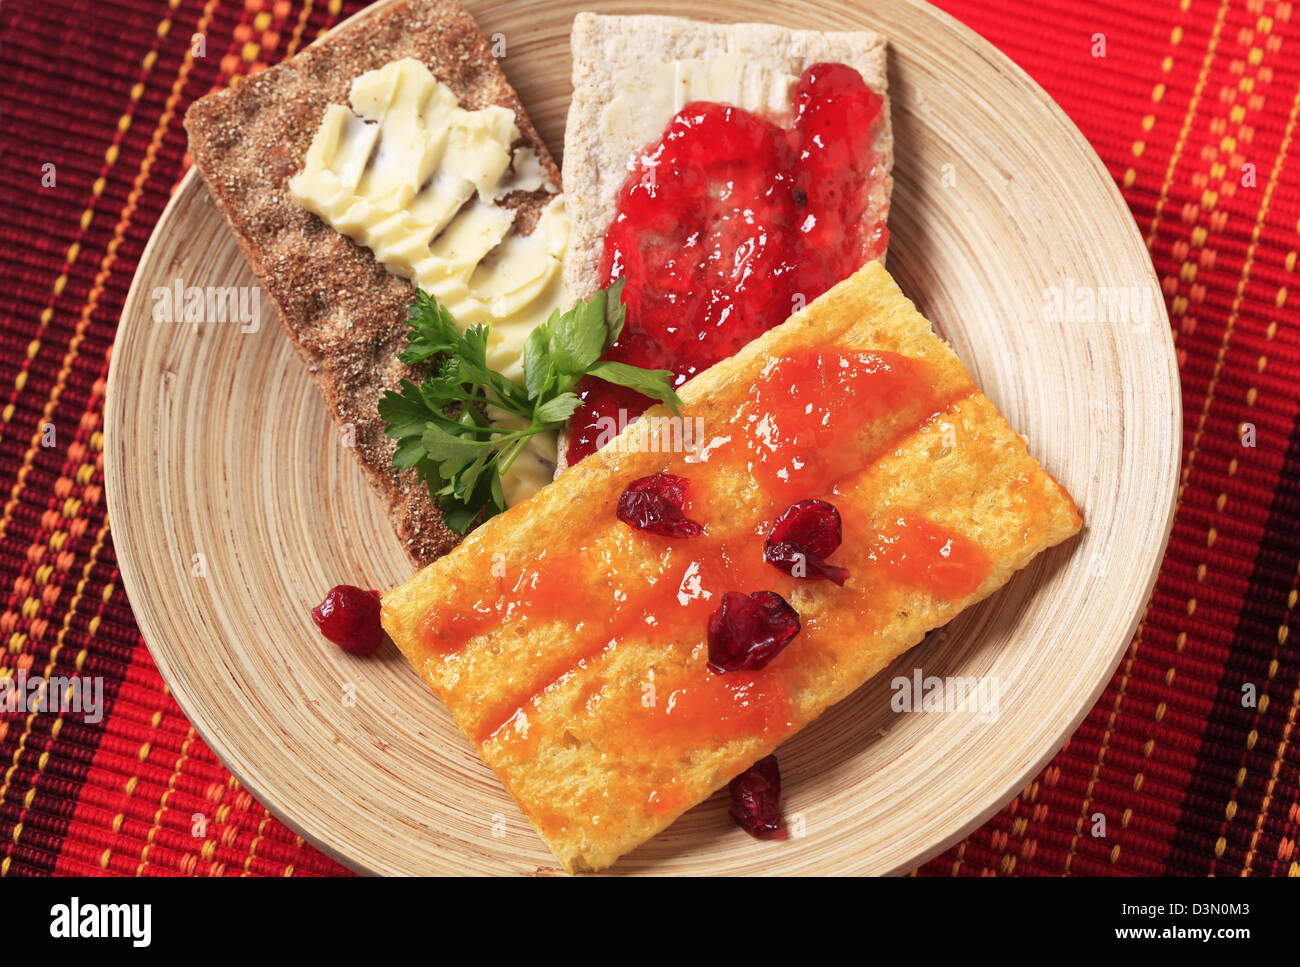 Crispbread with butter and jam Stock Photo